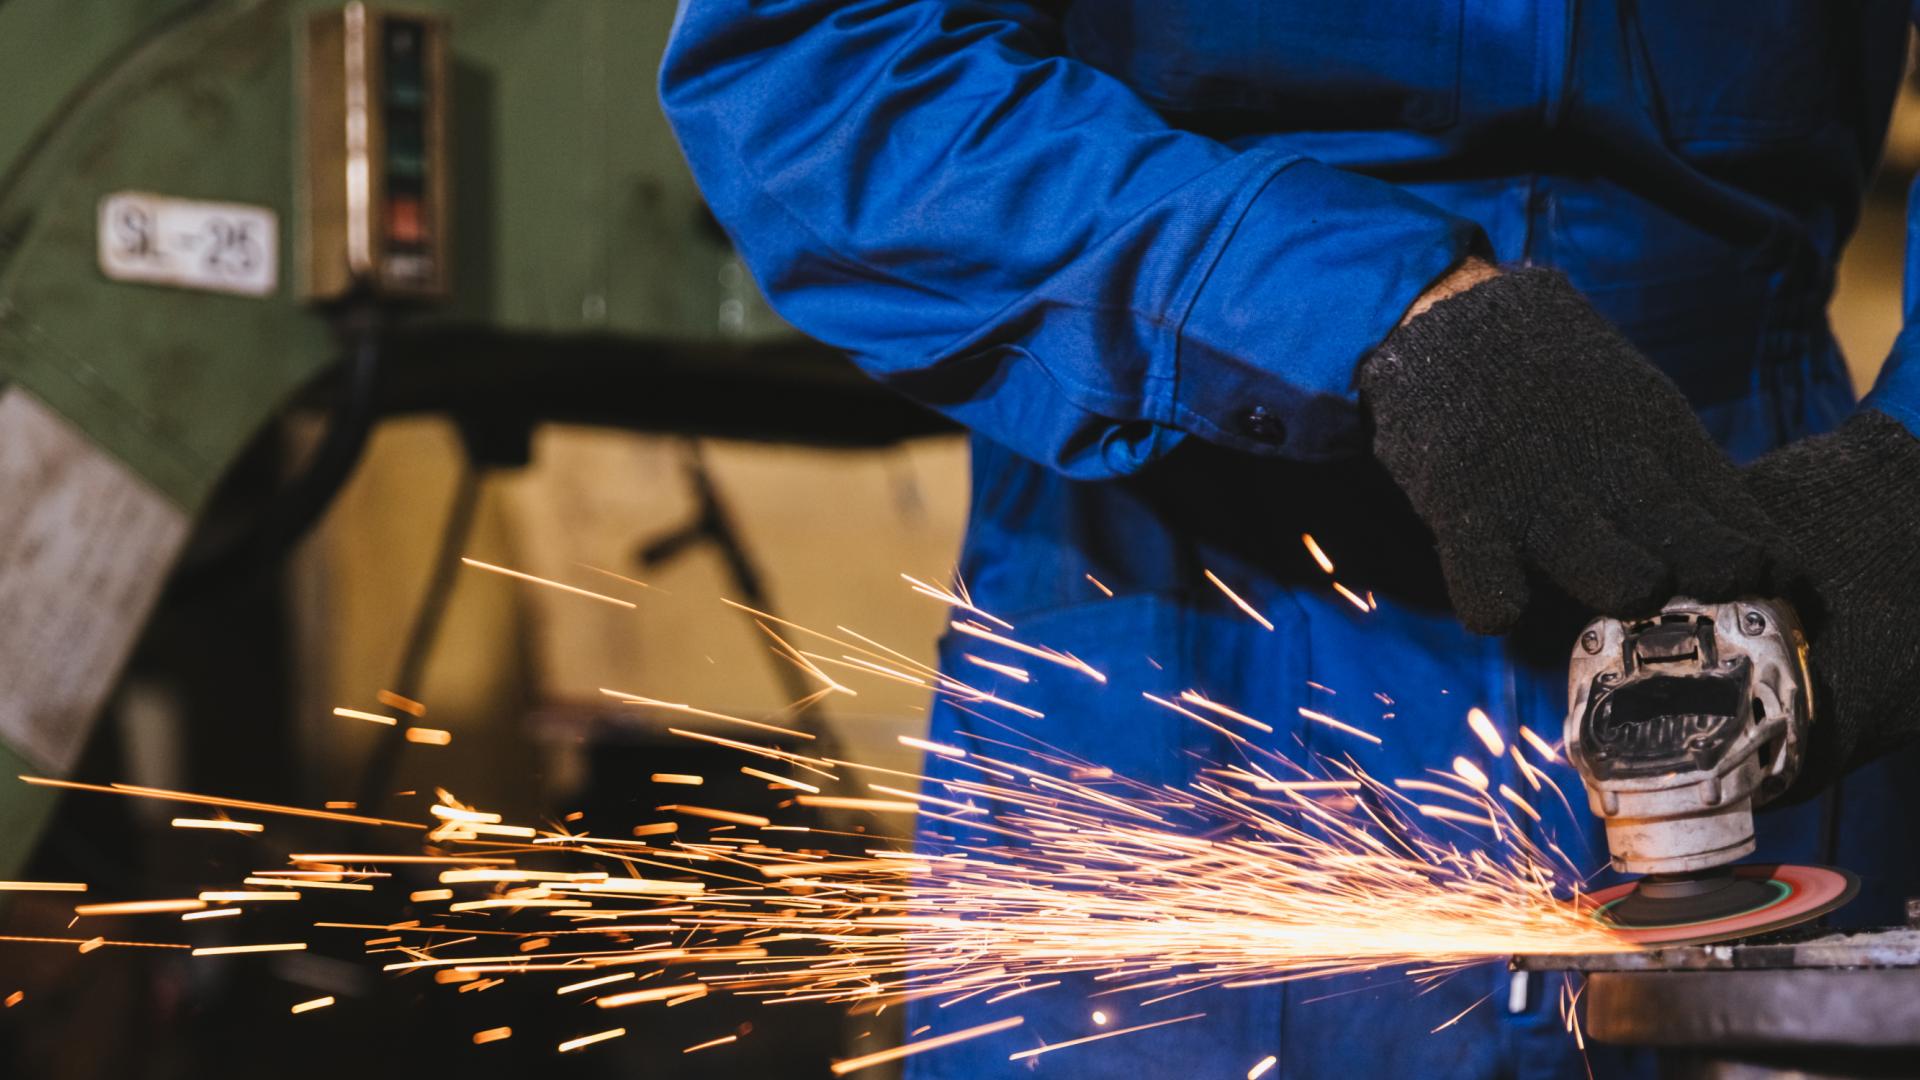 An image of someone operating an angle grinder